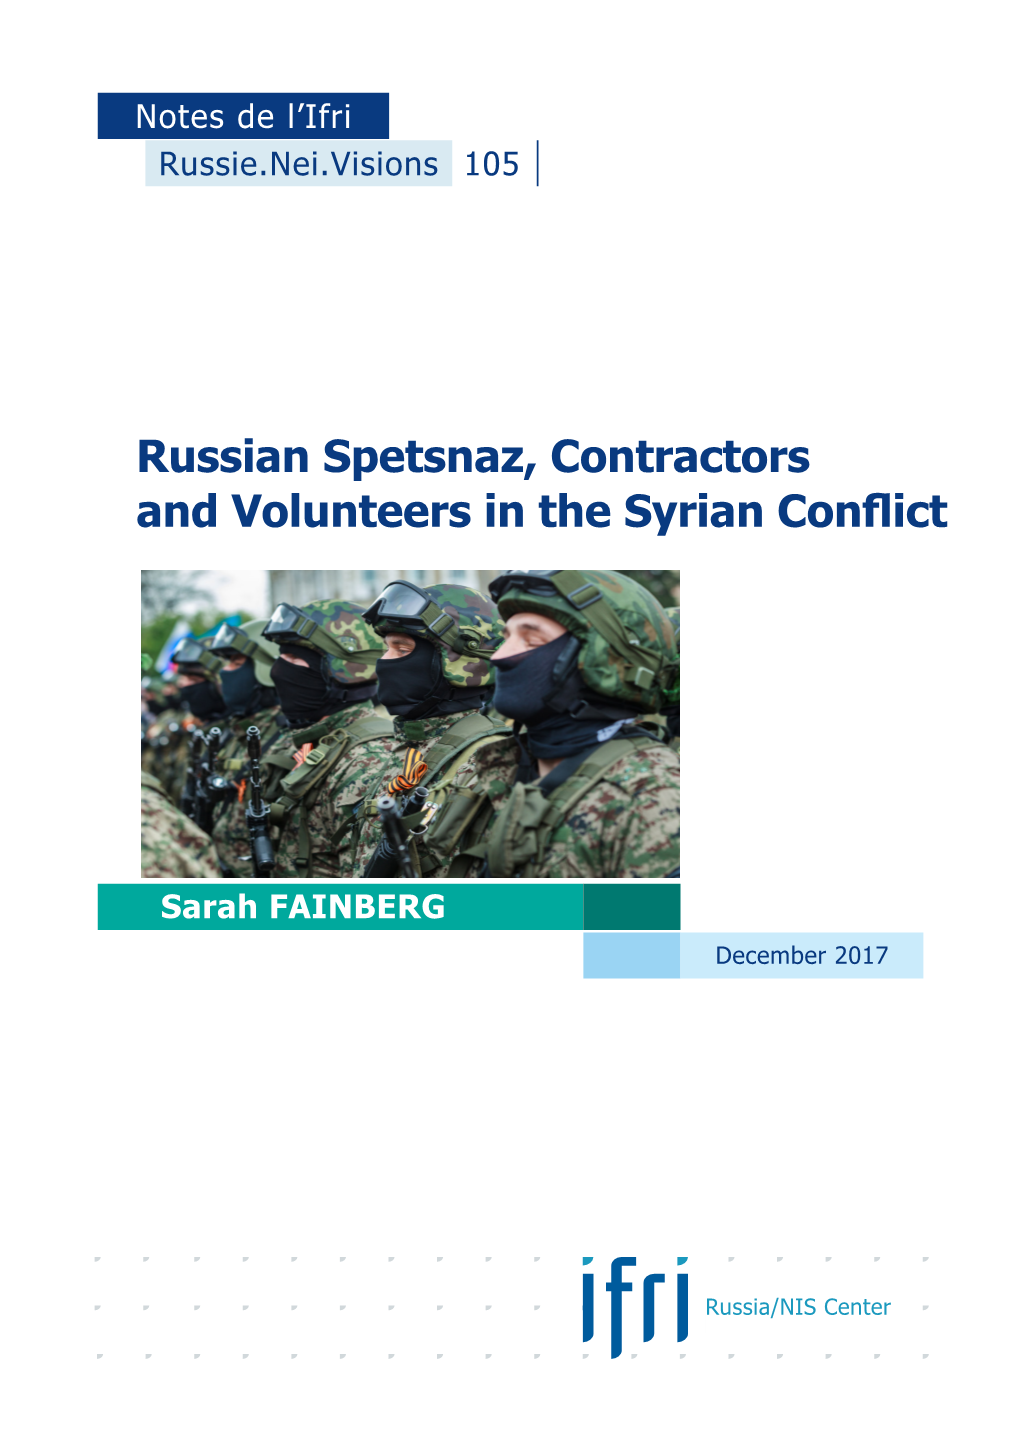 Russian Spetsnaz, Contractors and Volunteers in the Syrian Conflict